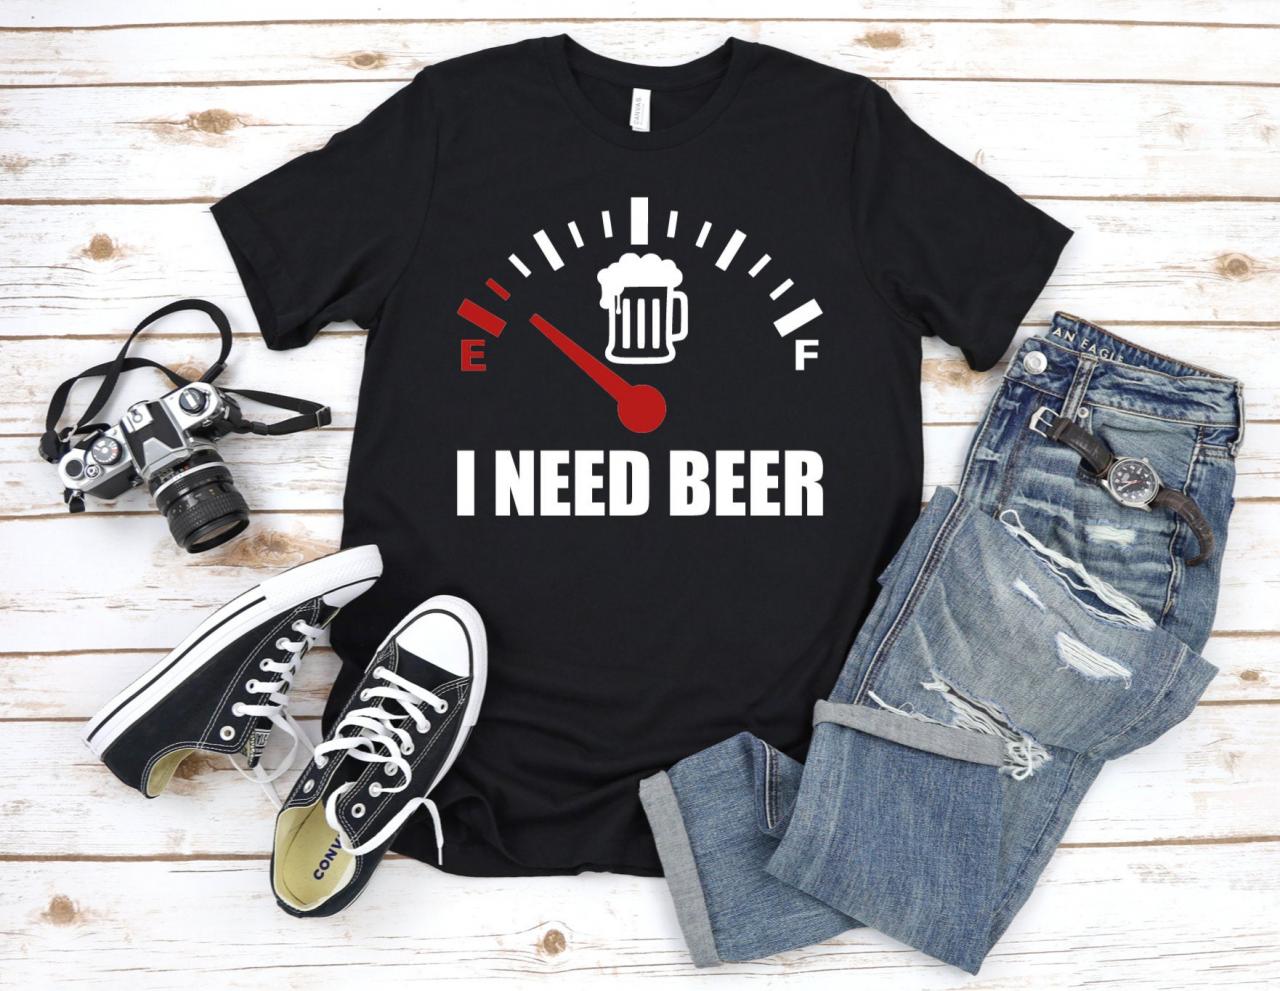 I Need Beer Fuel Gage Shirt, Funny Drinking Shirt, Gift For Him, Alcohol